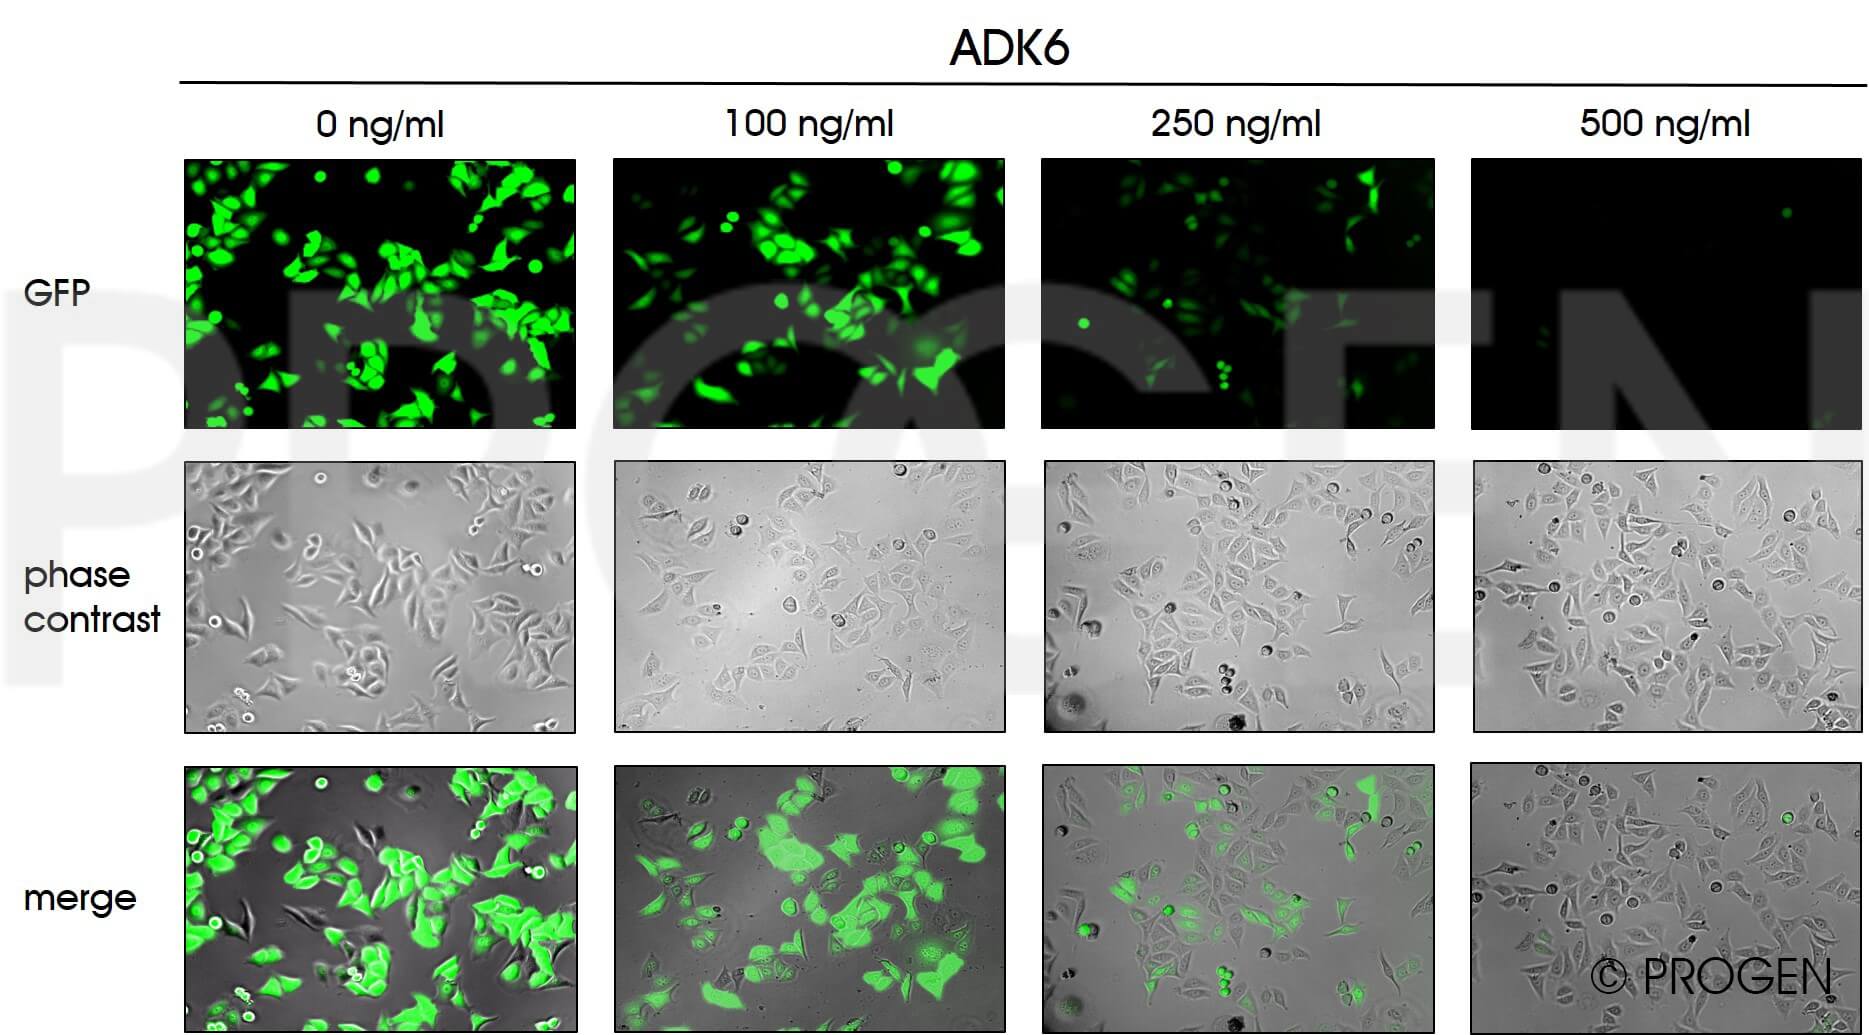 anti-AAV6 (intact particle) mouse monoclonal, ADK6, lyophilized, purified